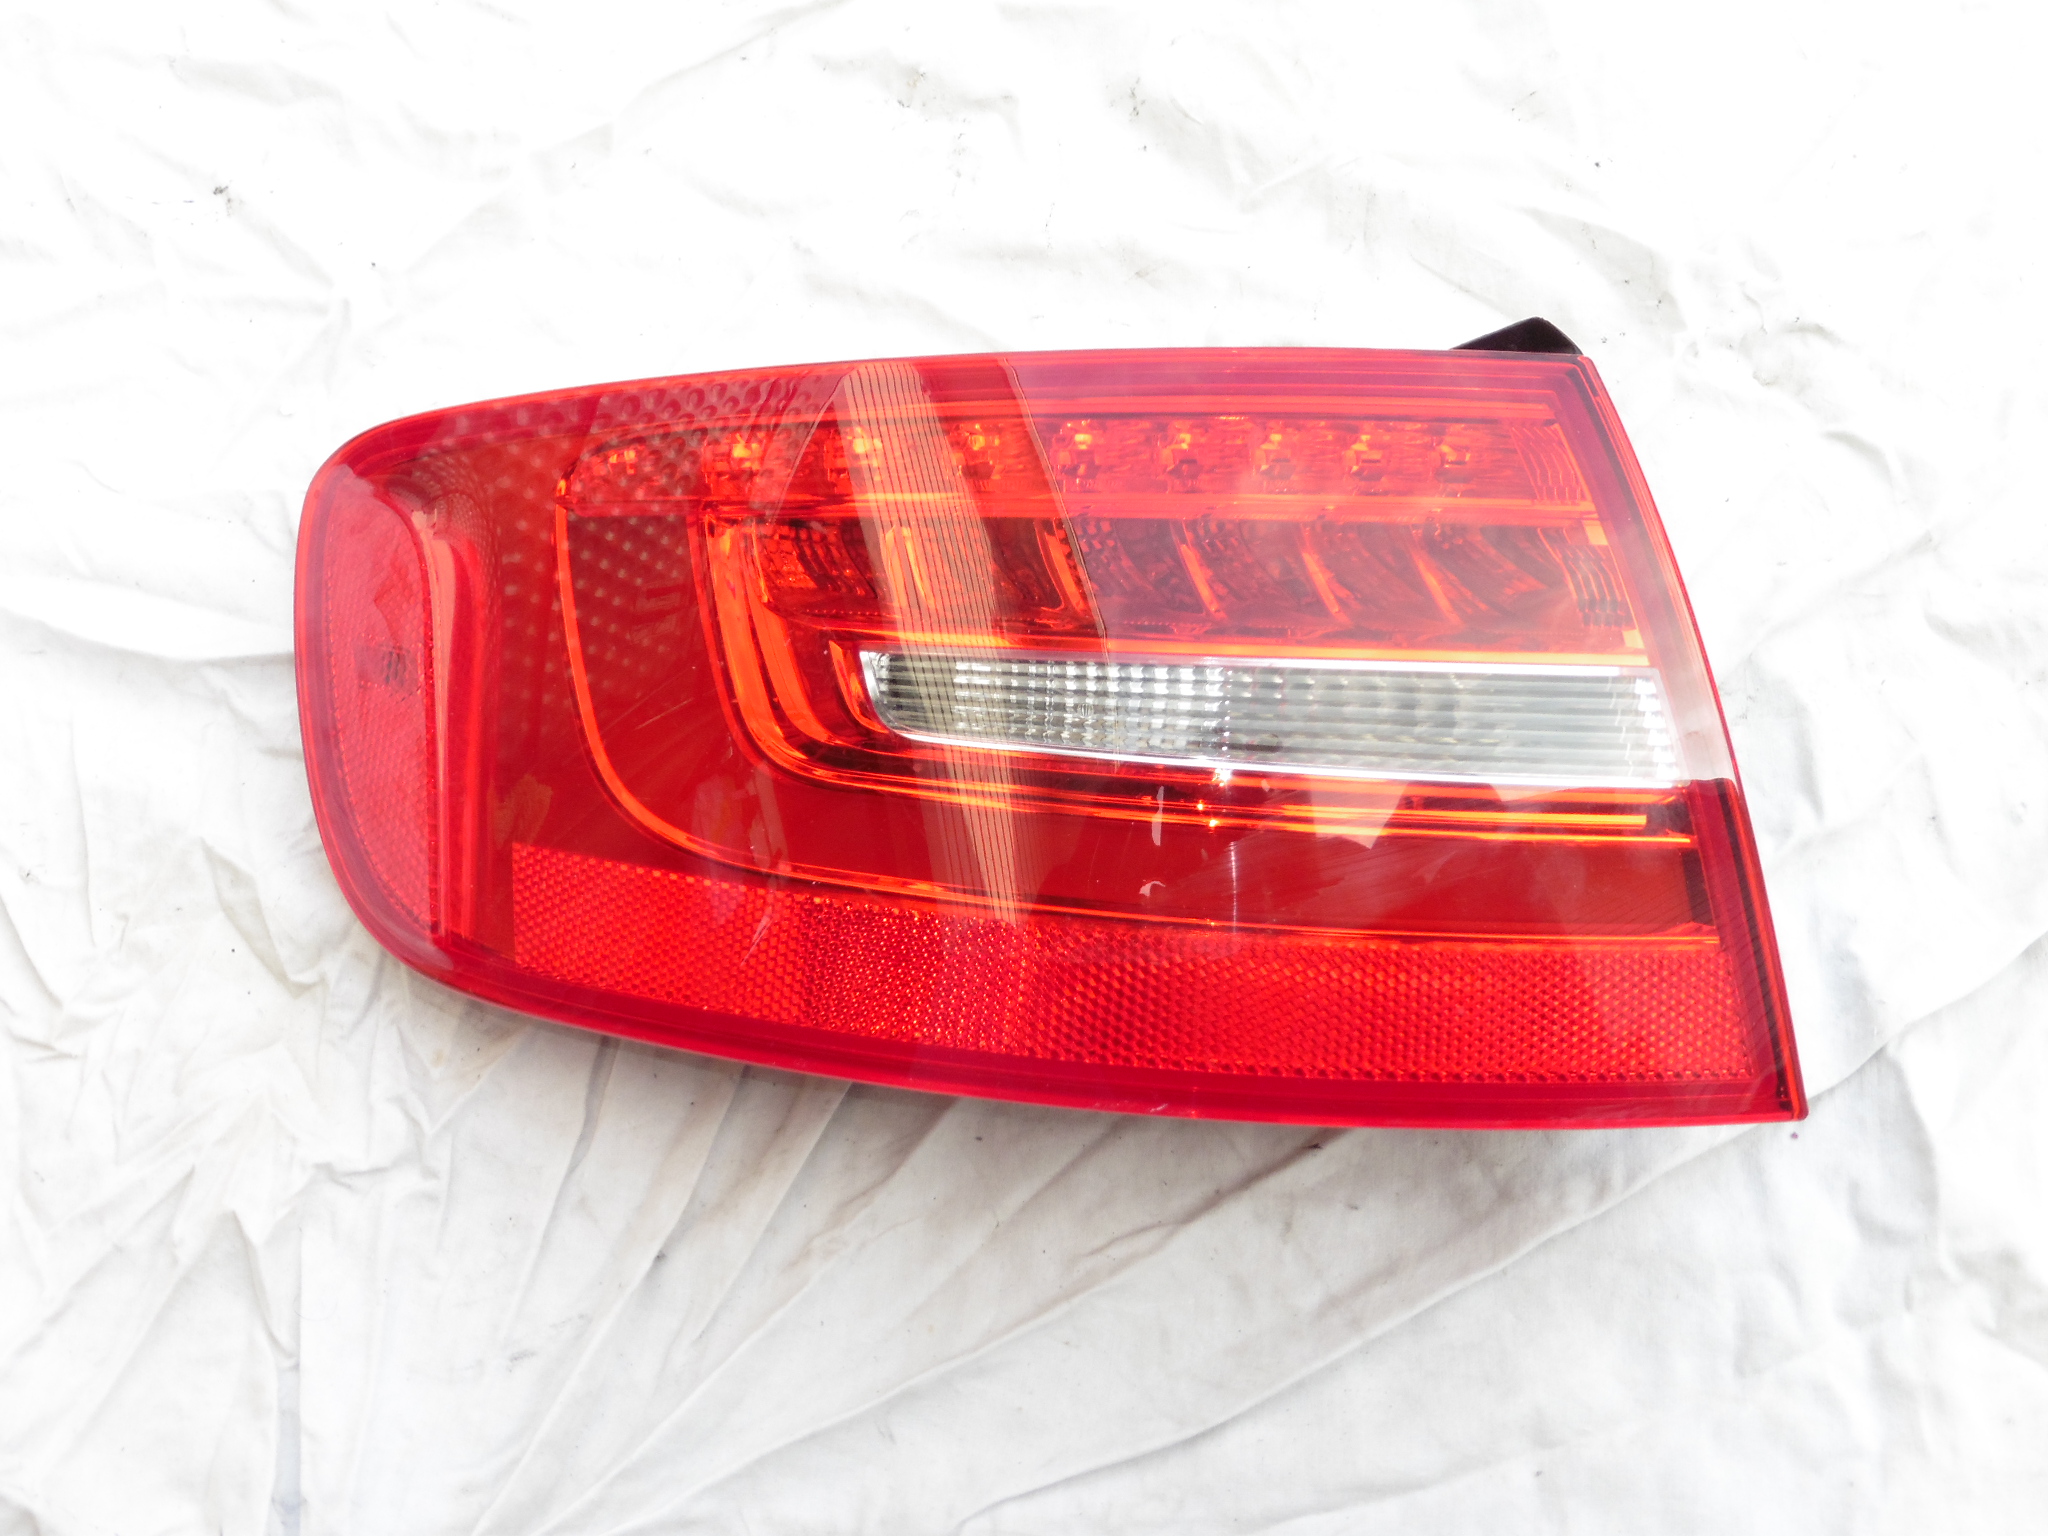 AUDI Allroad Tail Lamp Taillight Assembly Left Driver 8K9945095E 